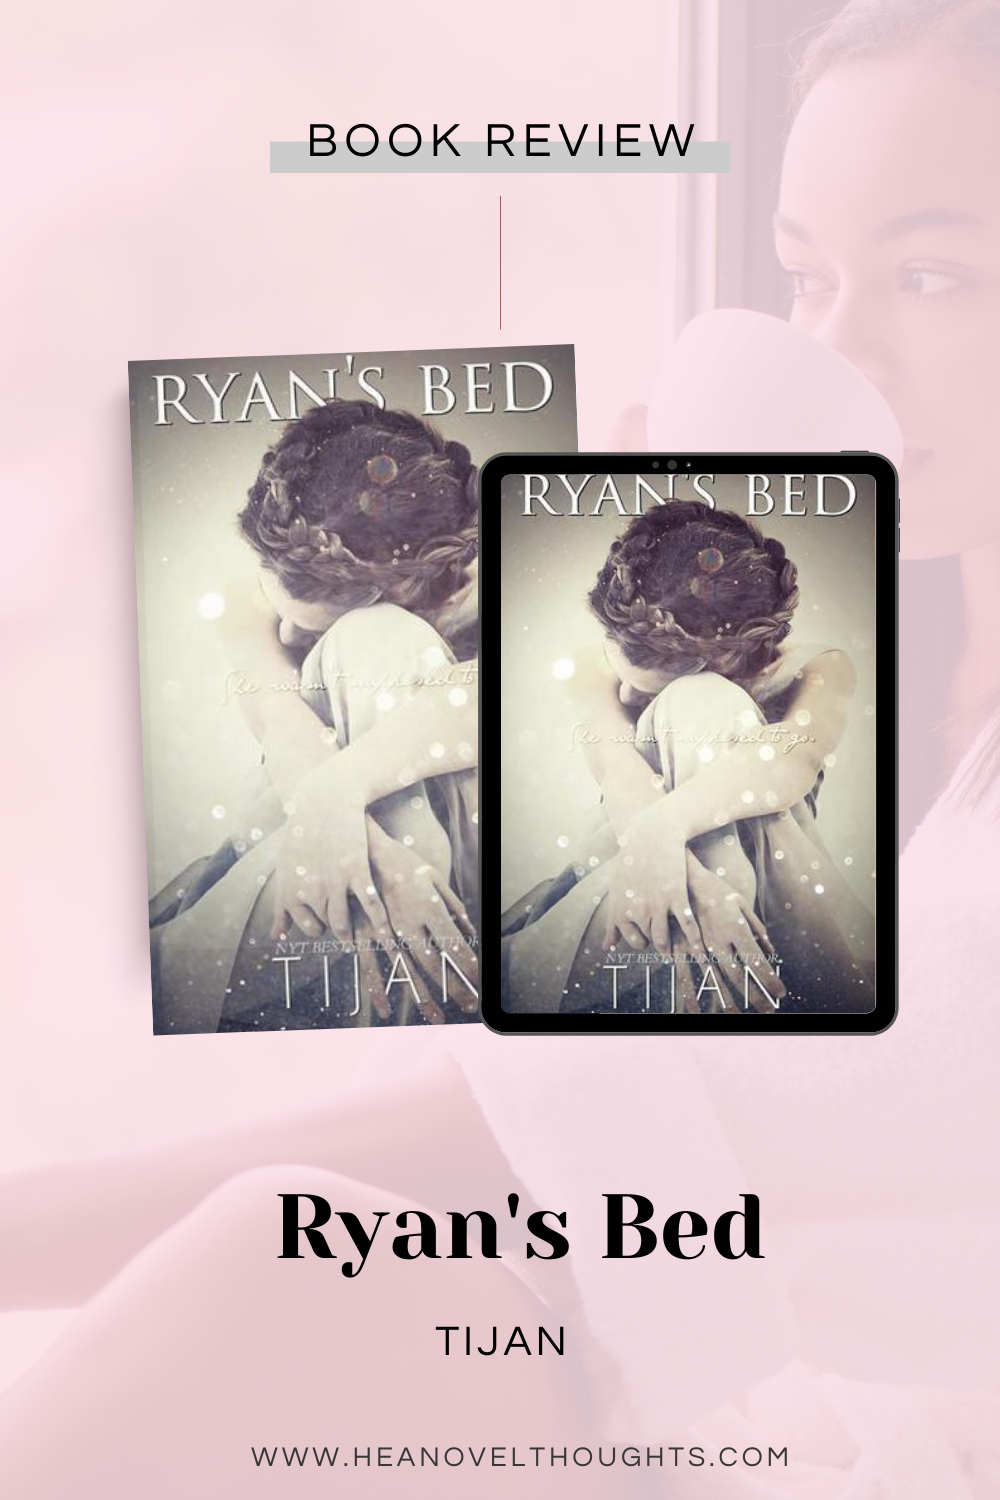 https://www.heanovelthoughts.com/wp-content/uploads/2018/02/Ryans-Bed-1.png